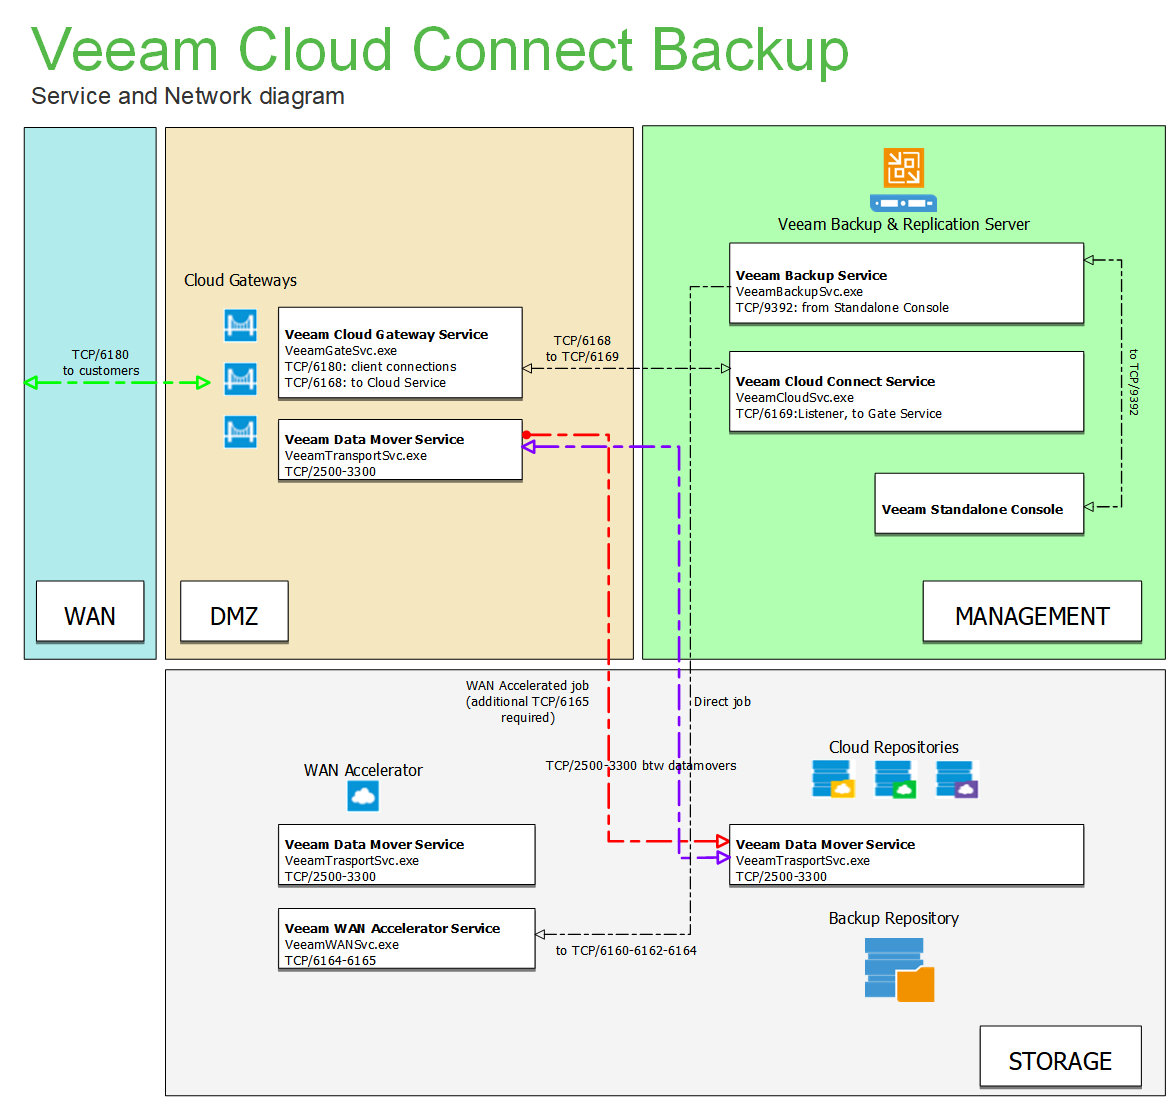 Network Diagram for Veeam Cloud Connect Backup